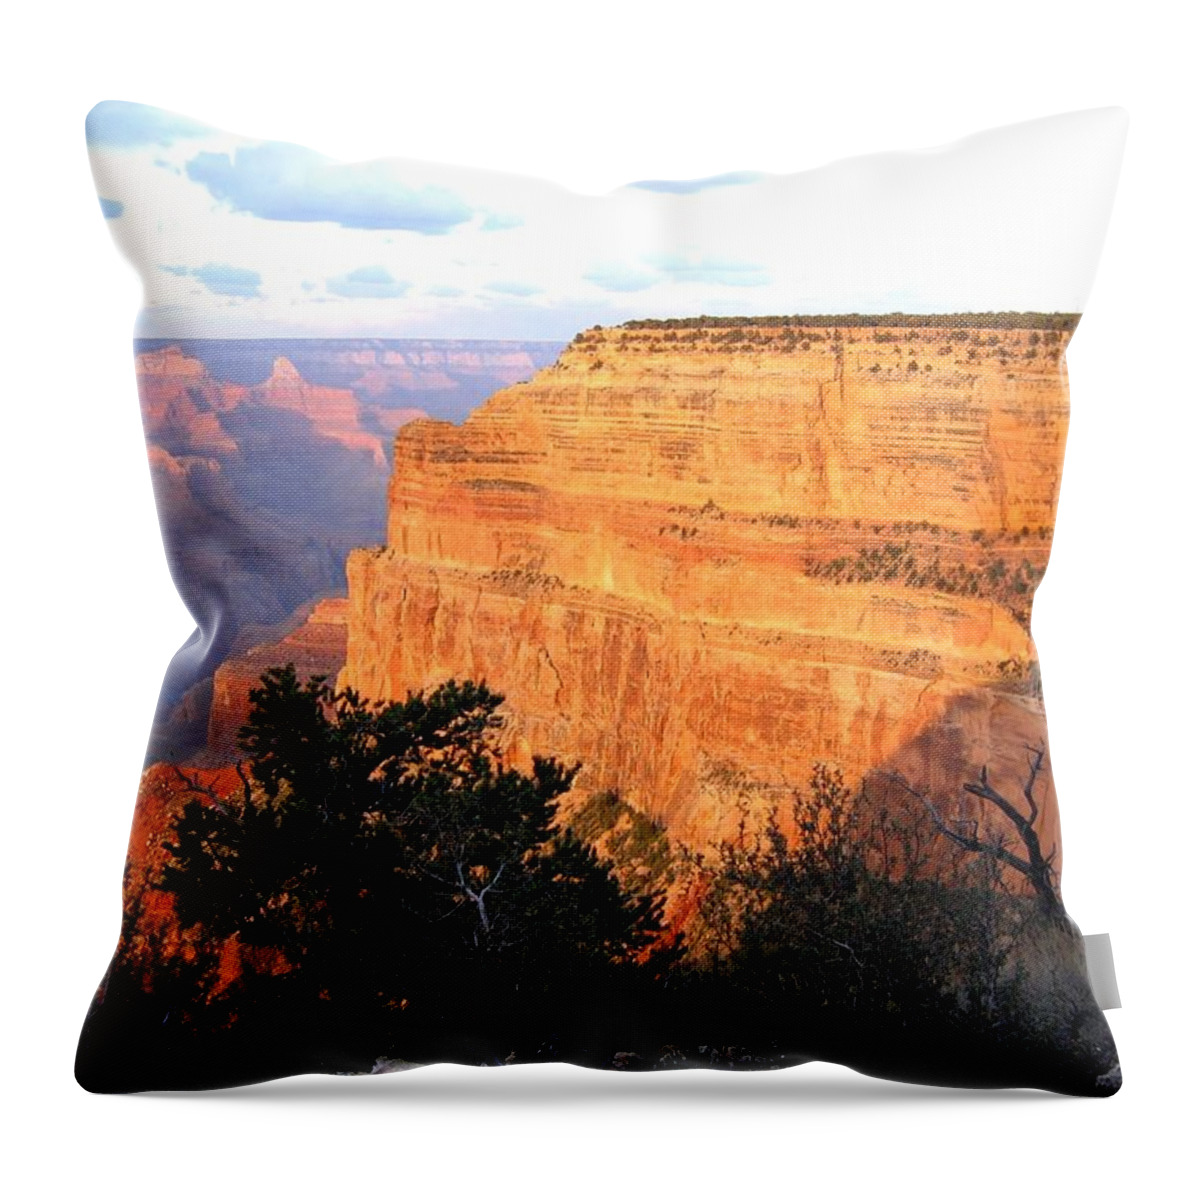 Grand Canyon 76 Throw Pillow featuring the photograph Grand Canyon 76 by Will Borden